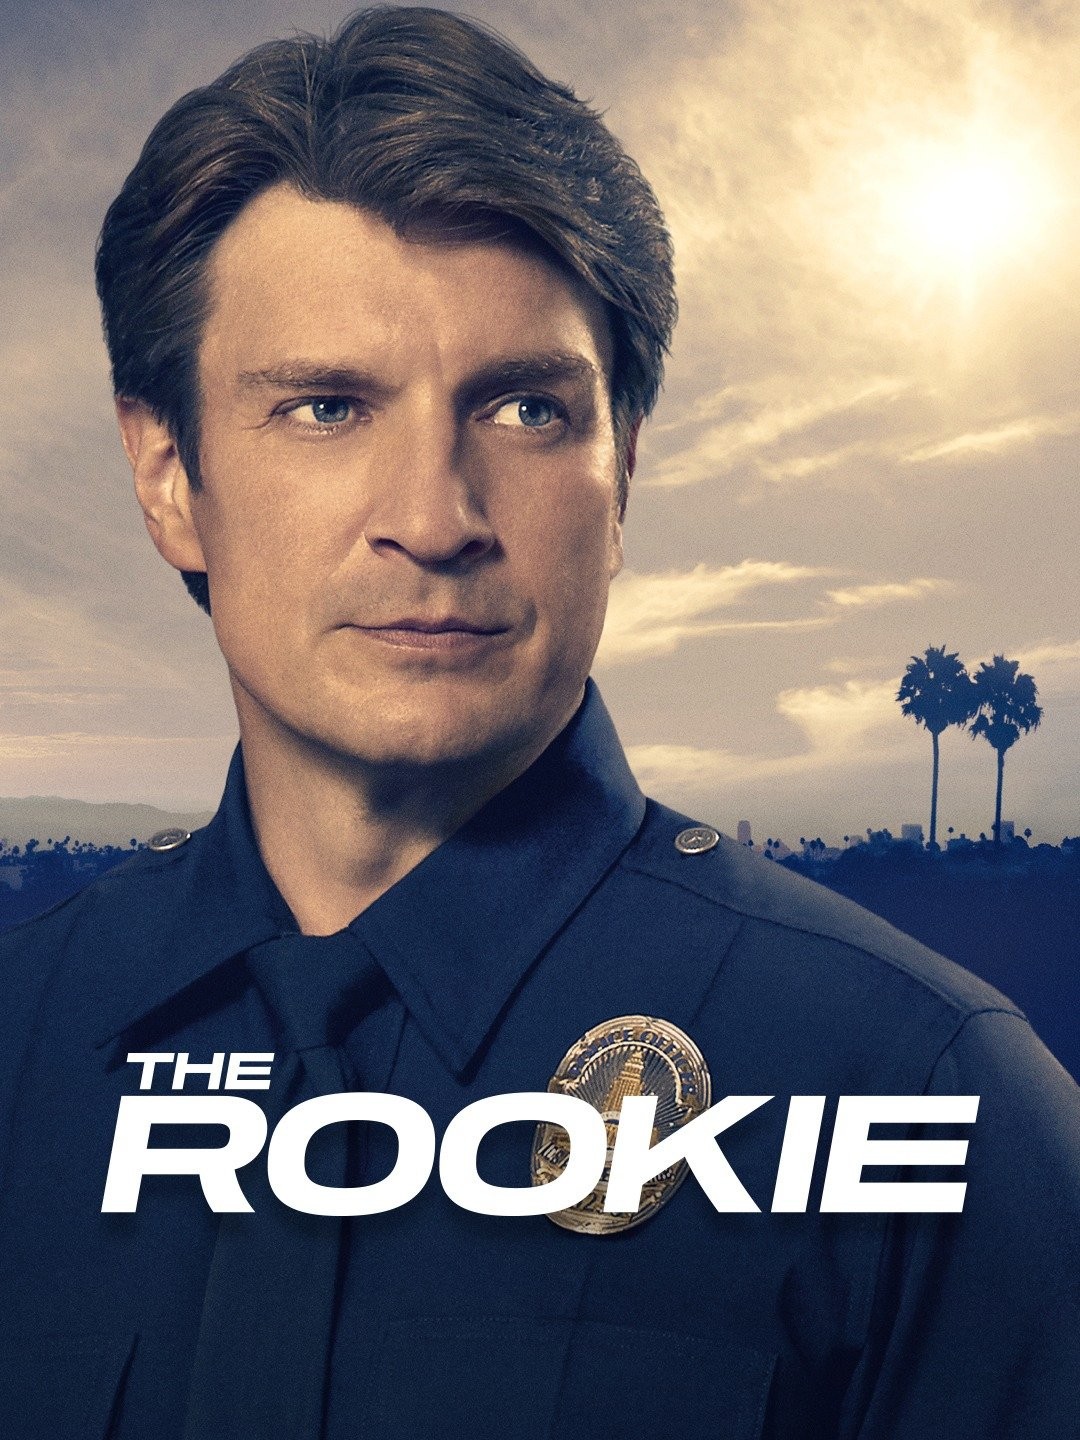 The Rookie Cast Names and Age 2019 